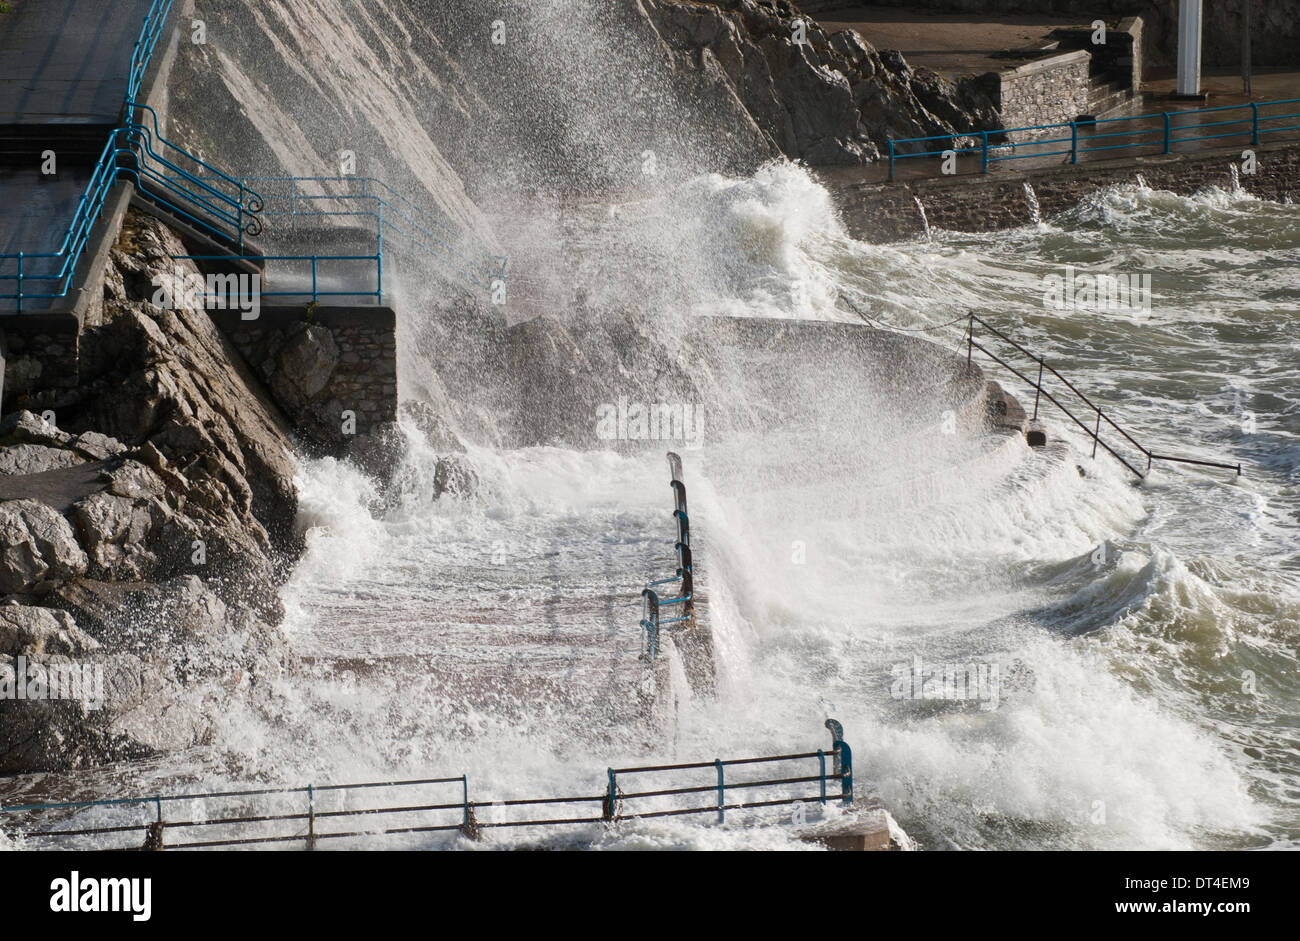 Plymouth, Devon, UK. 8th February 2014. Plymouth Hoe, England during strong winds. The waves crash over pedestrian walkways and paths. Credit:  Anna Stevenson/Alamy Live News Stock Photo